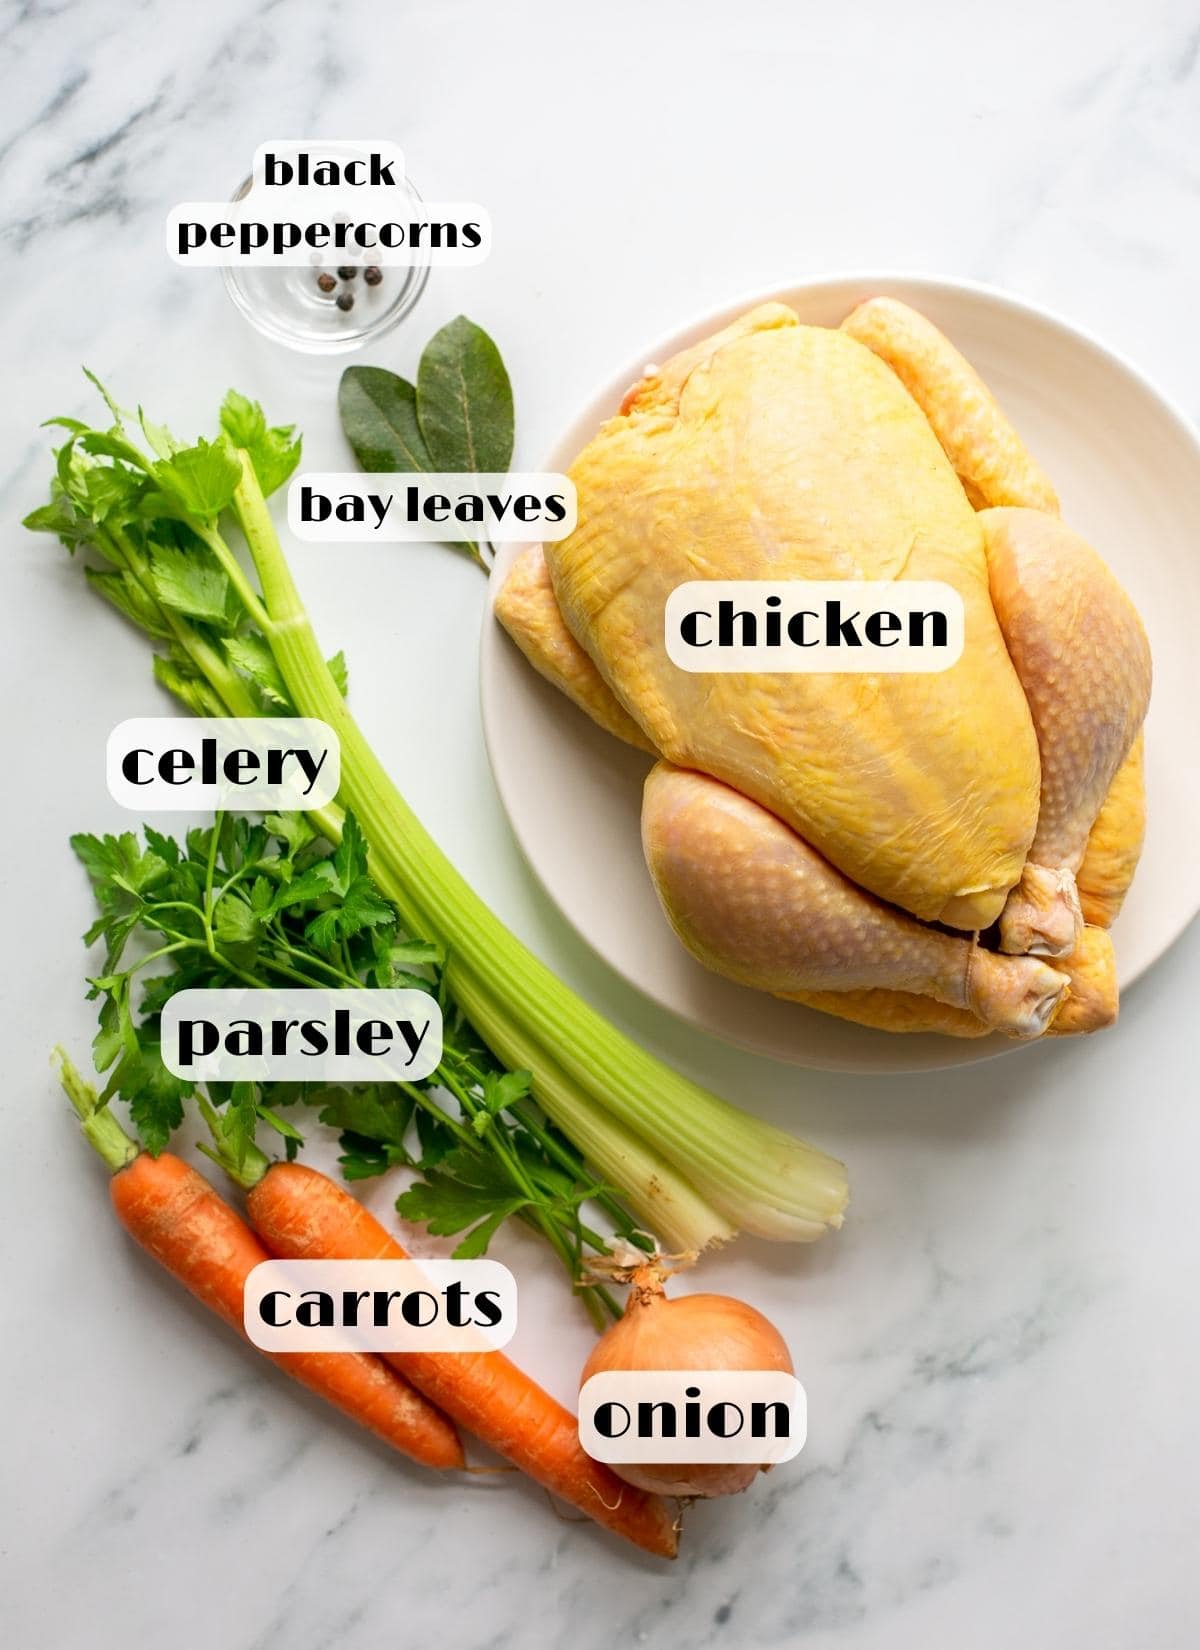 brodo di pollo ingredients: chicken, celery, parsley, carrots, onion, black peppercorns and bay leaves.